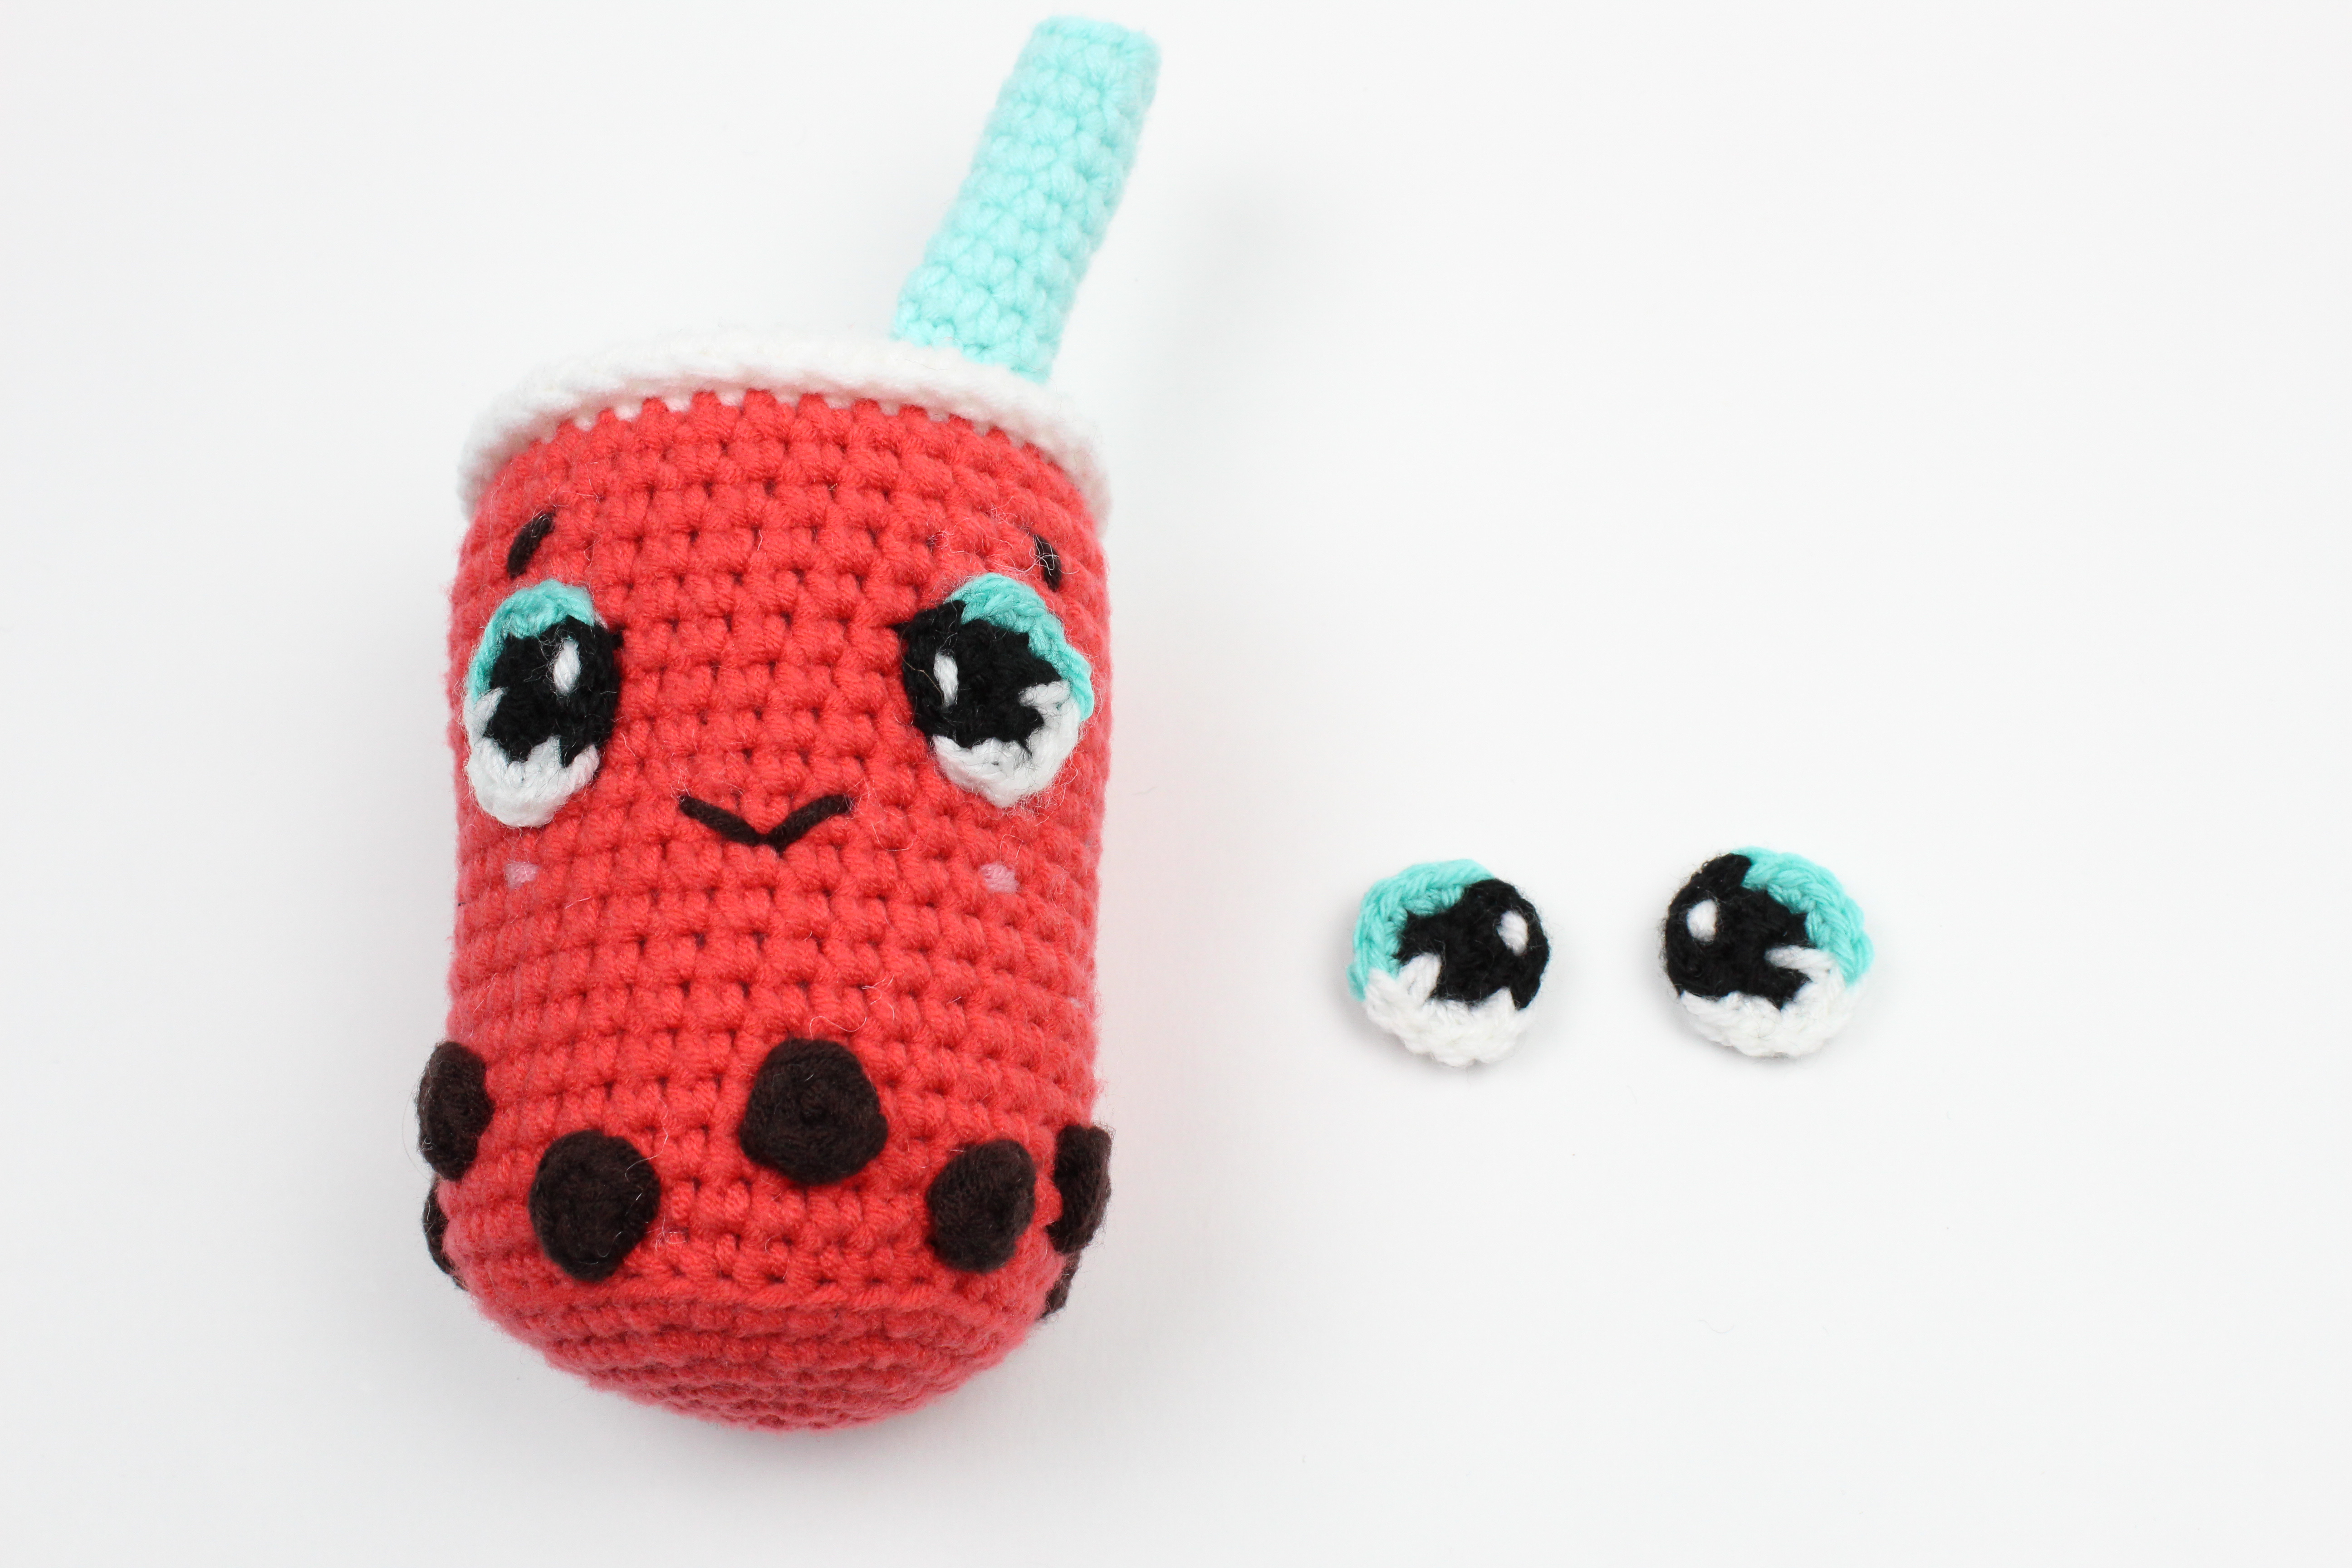 85 Crochet Amigurumi Doll Patterns and Designs to easily get started with —  Pocket Yarnlings — Pocket Yarnlings